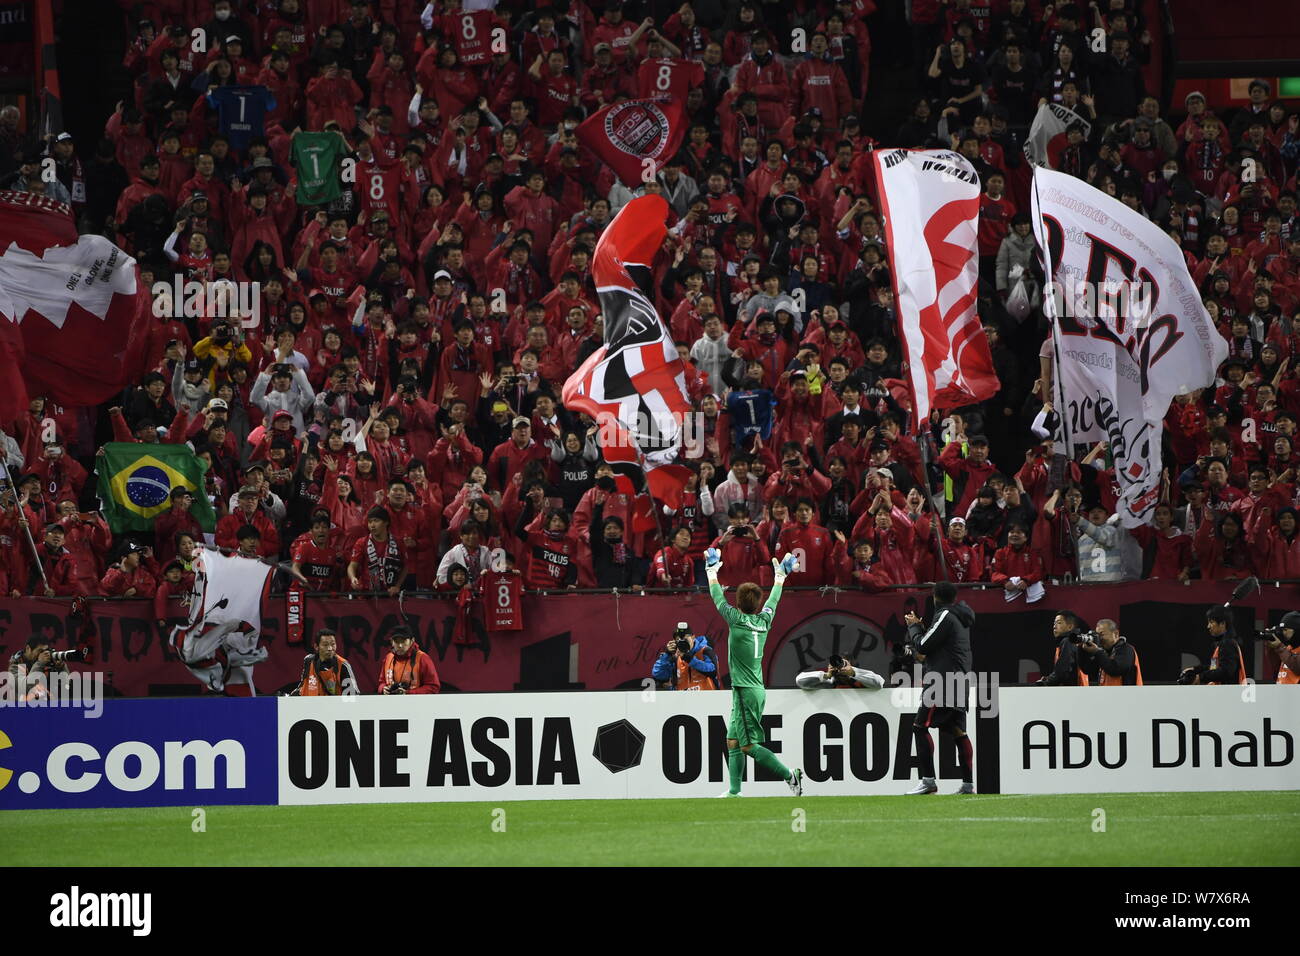 Shusaku Nishikawa of Japan's Urawa Red Diamonds waves to Japanese football fans after defeating China's Shanghai SIPG in their Group F match during th Stock Photo